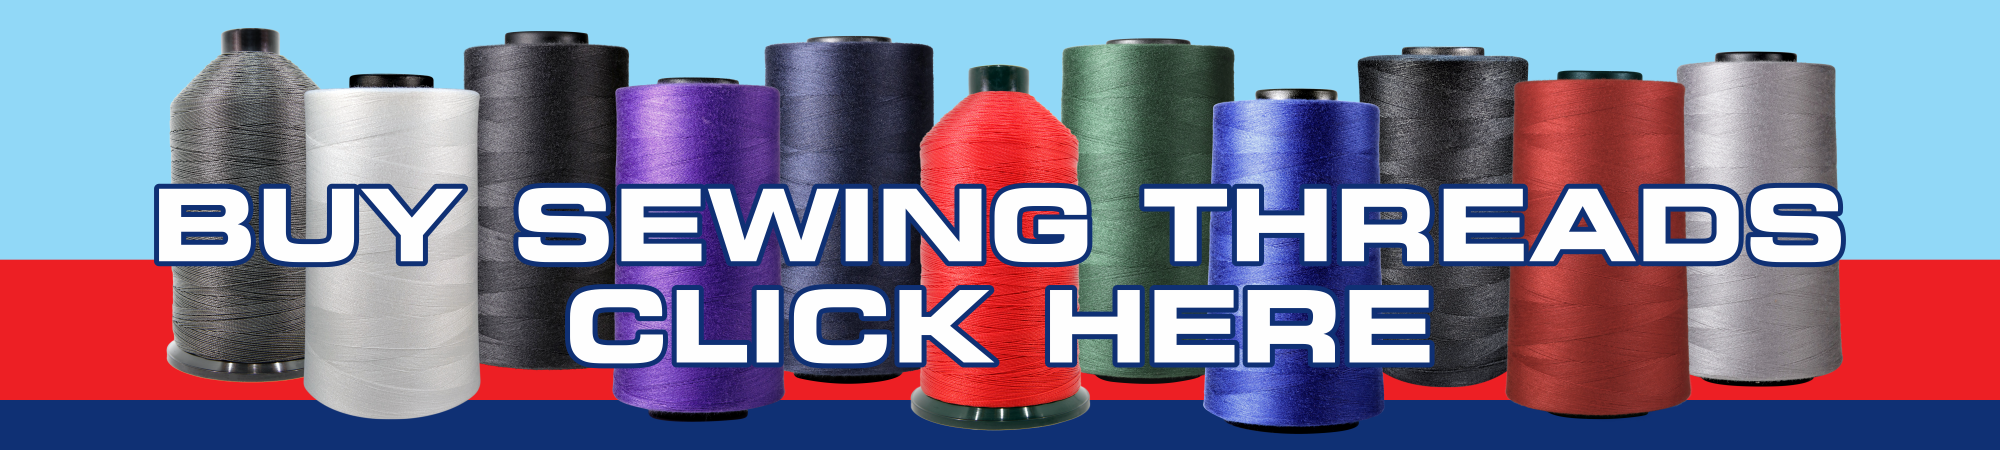 Ad Banner Buy Sewing Threads